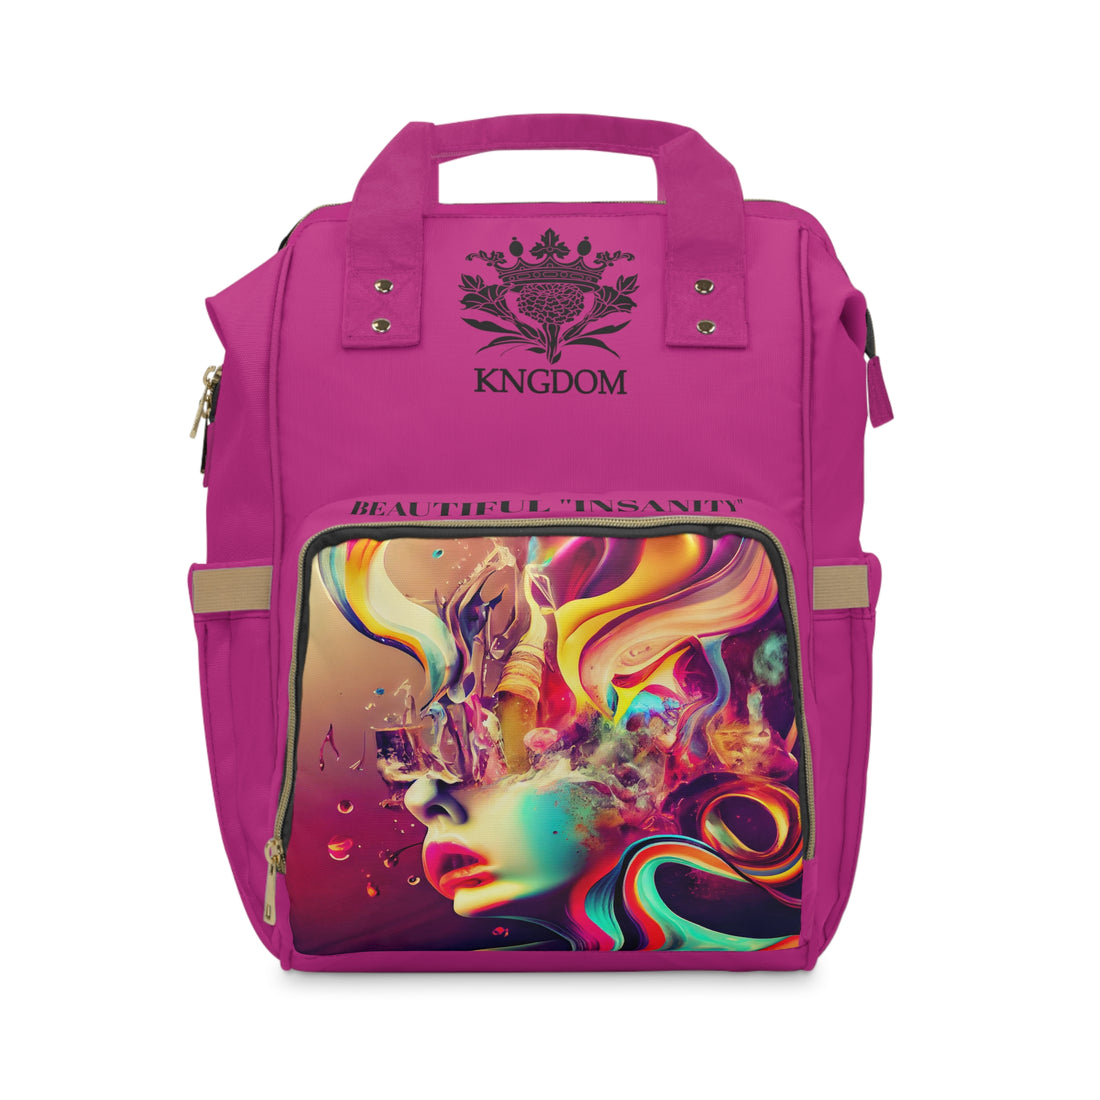 BEAUTIFUL &quot;INSANITY&quot;- Multifunctional Diaper Backpack W/Blk Kngdom Logo